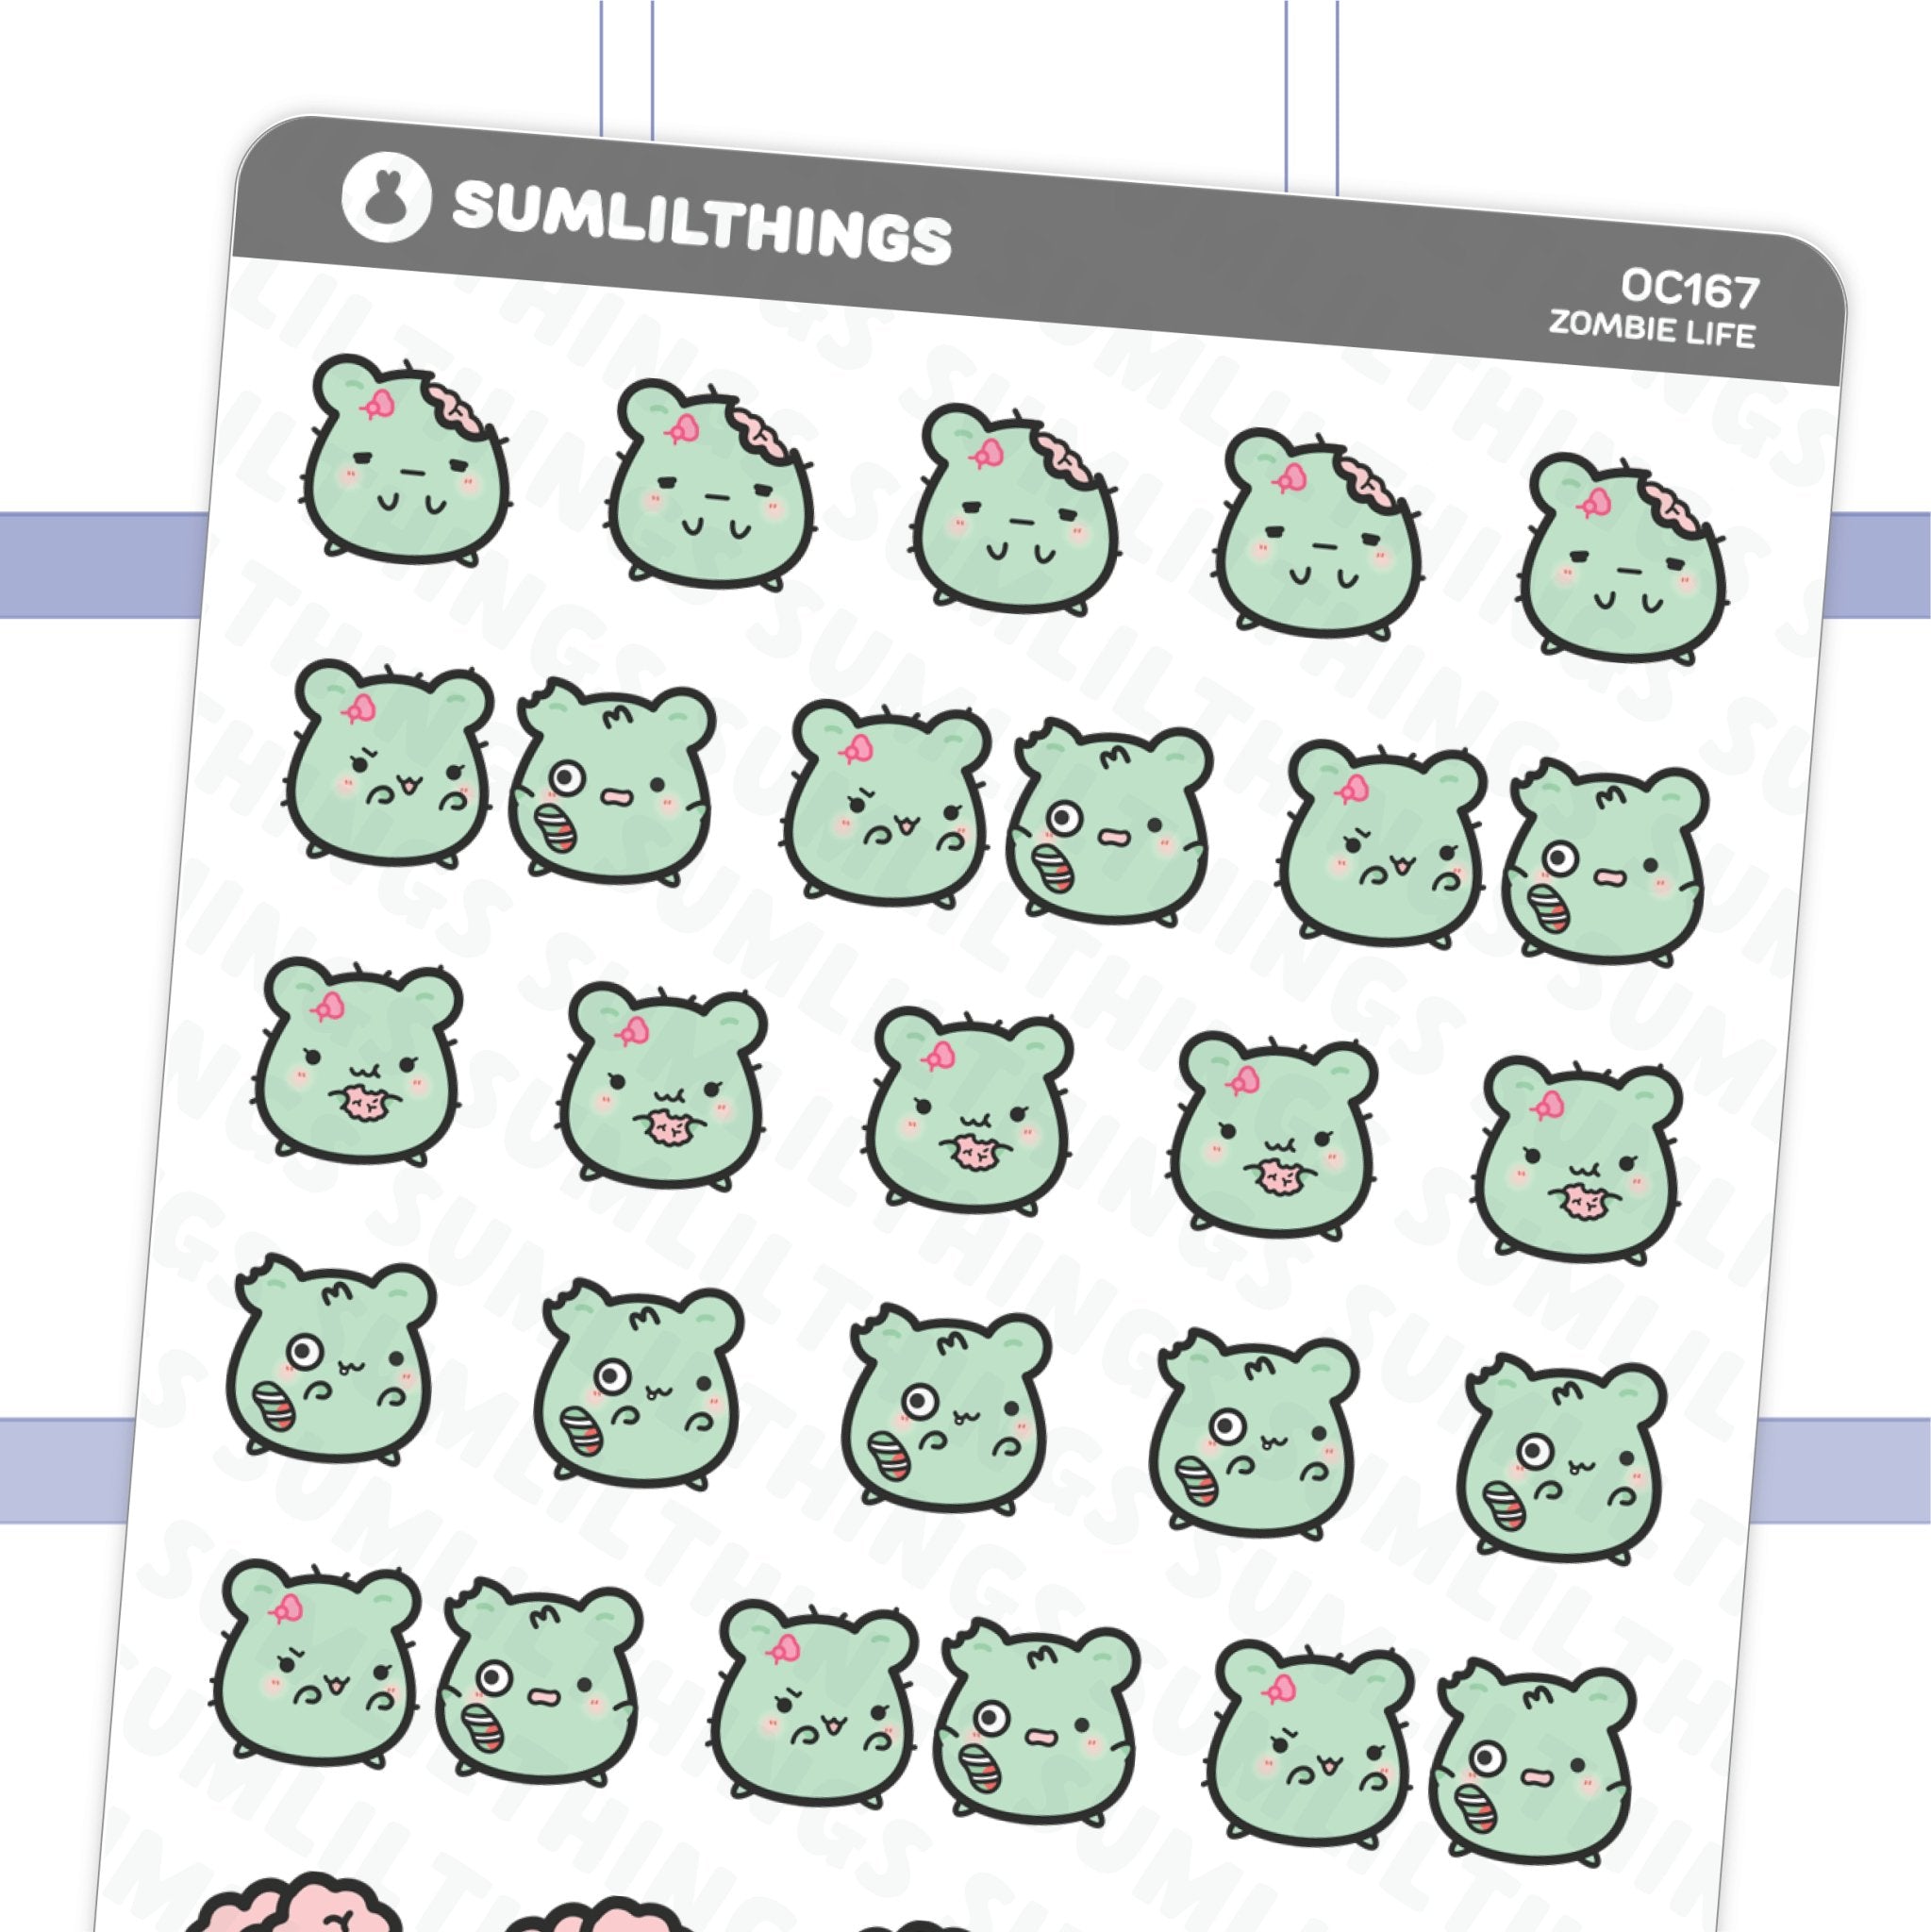 Lil' Zombie Life Stickers - SumLilThings